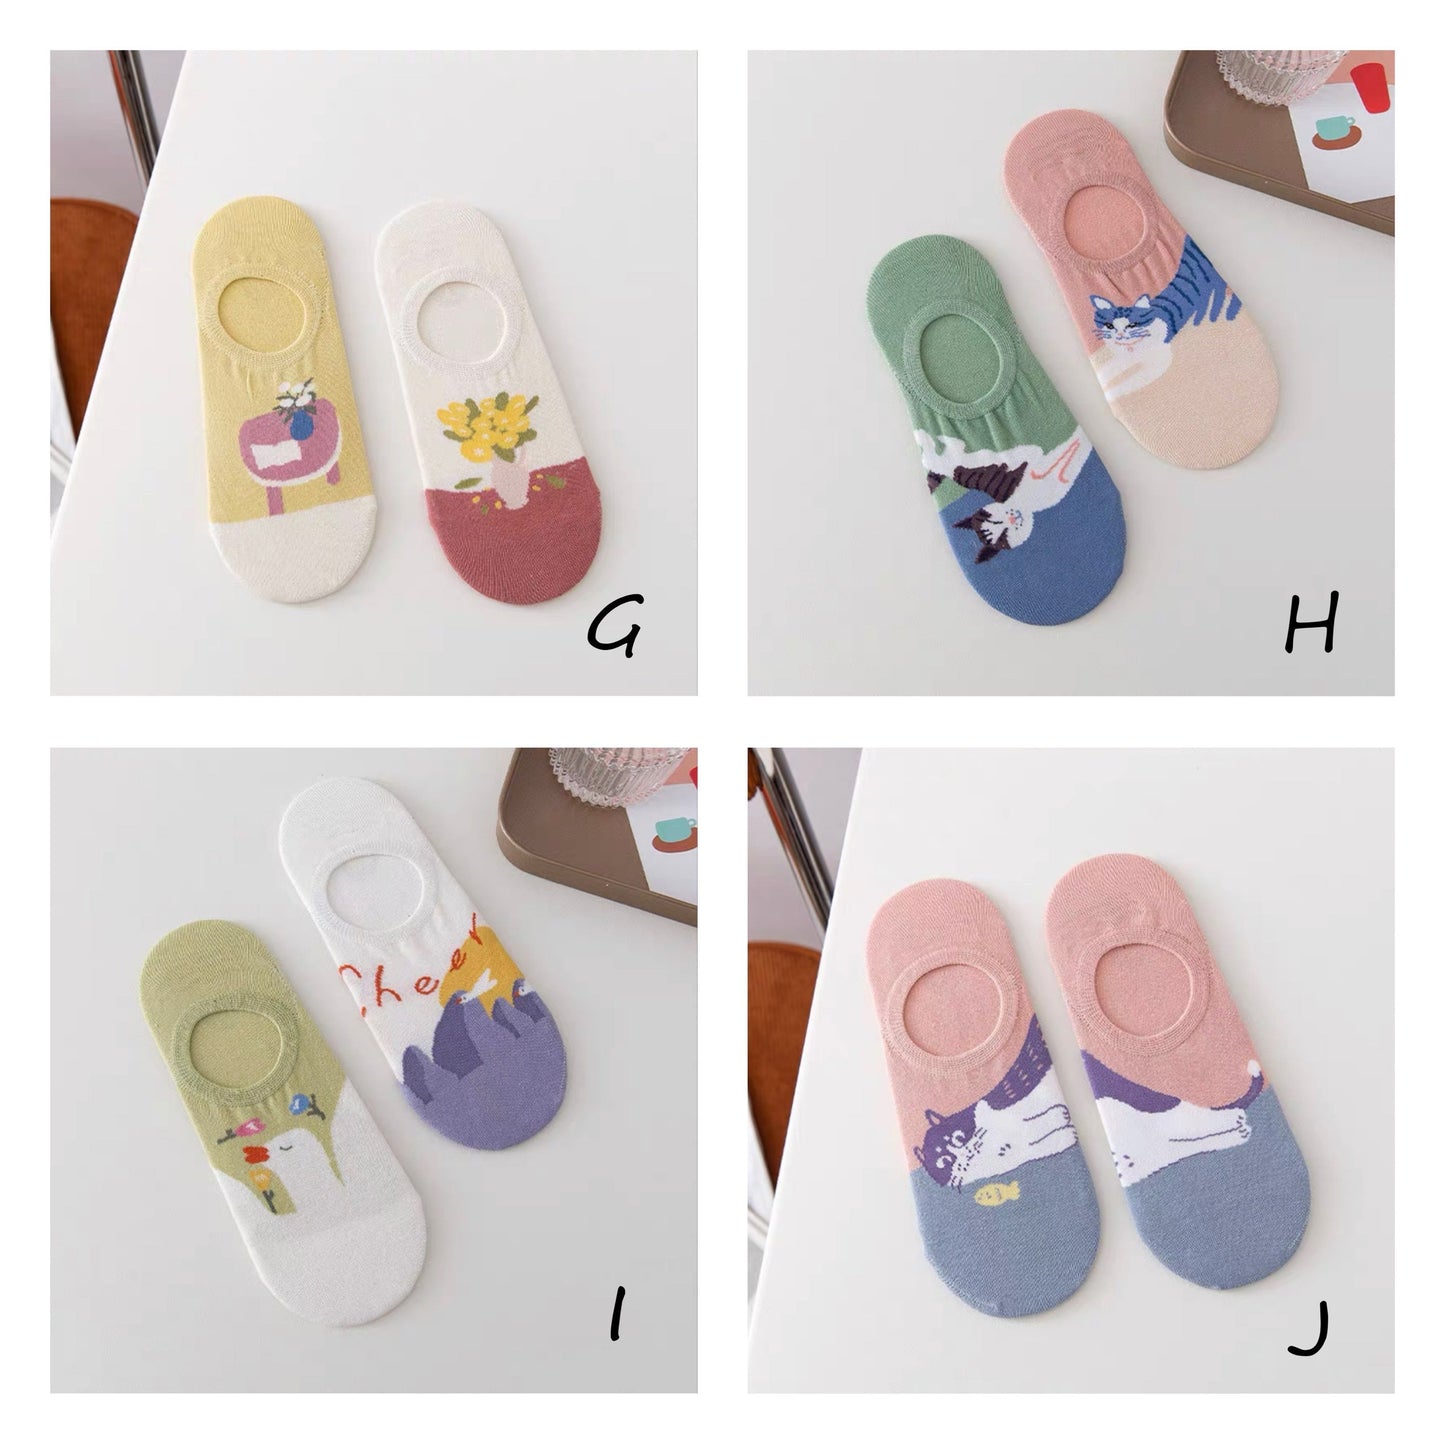 Miss June’s | Women’s 2 pairs cotton ankle socks｜animals | Patented | Daily | Cute  | Designed | Embroidered | Gift Idea | Comfortable |